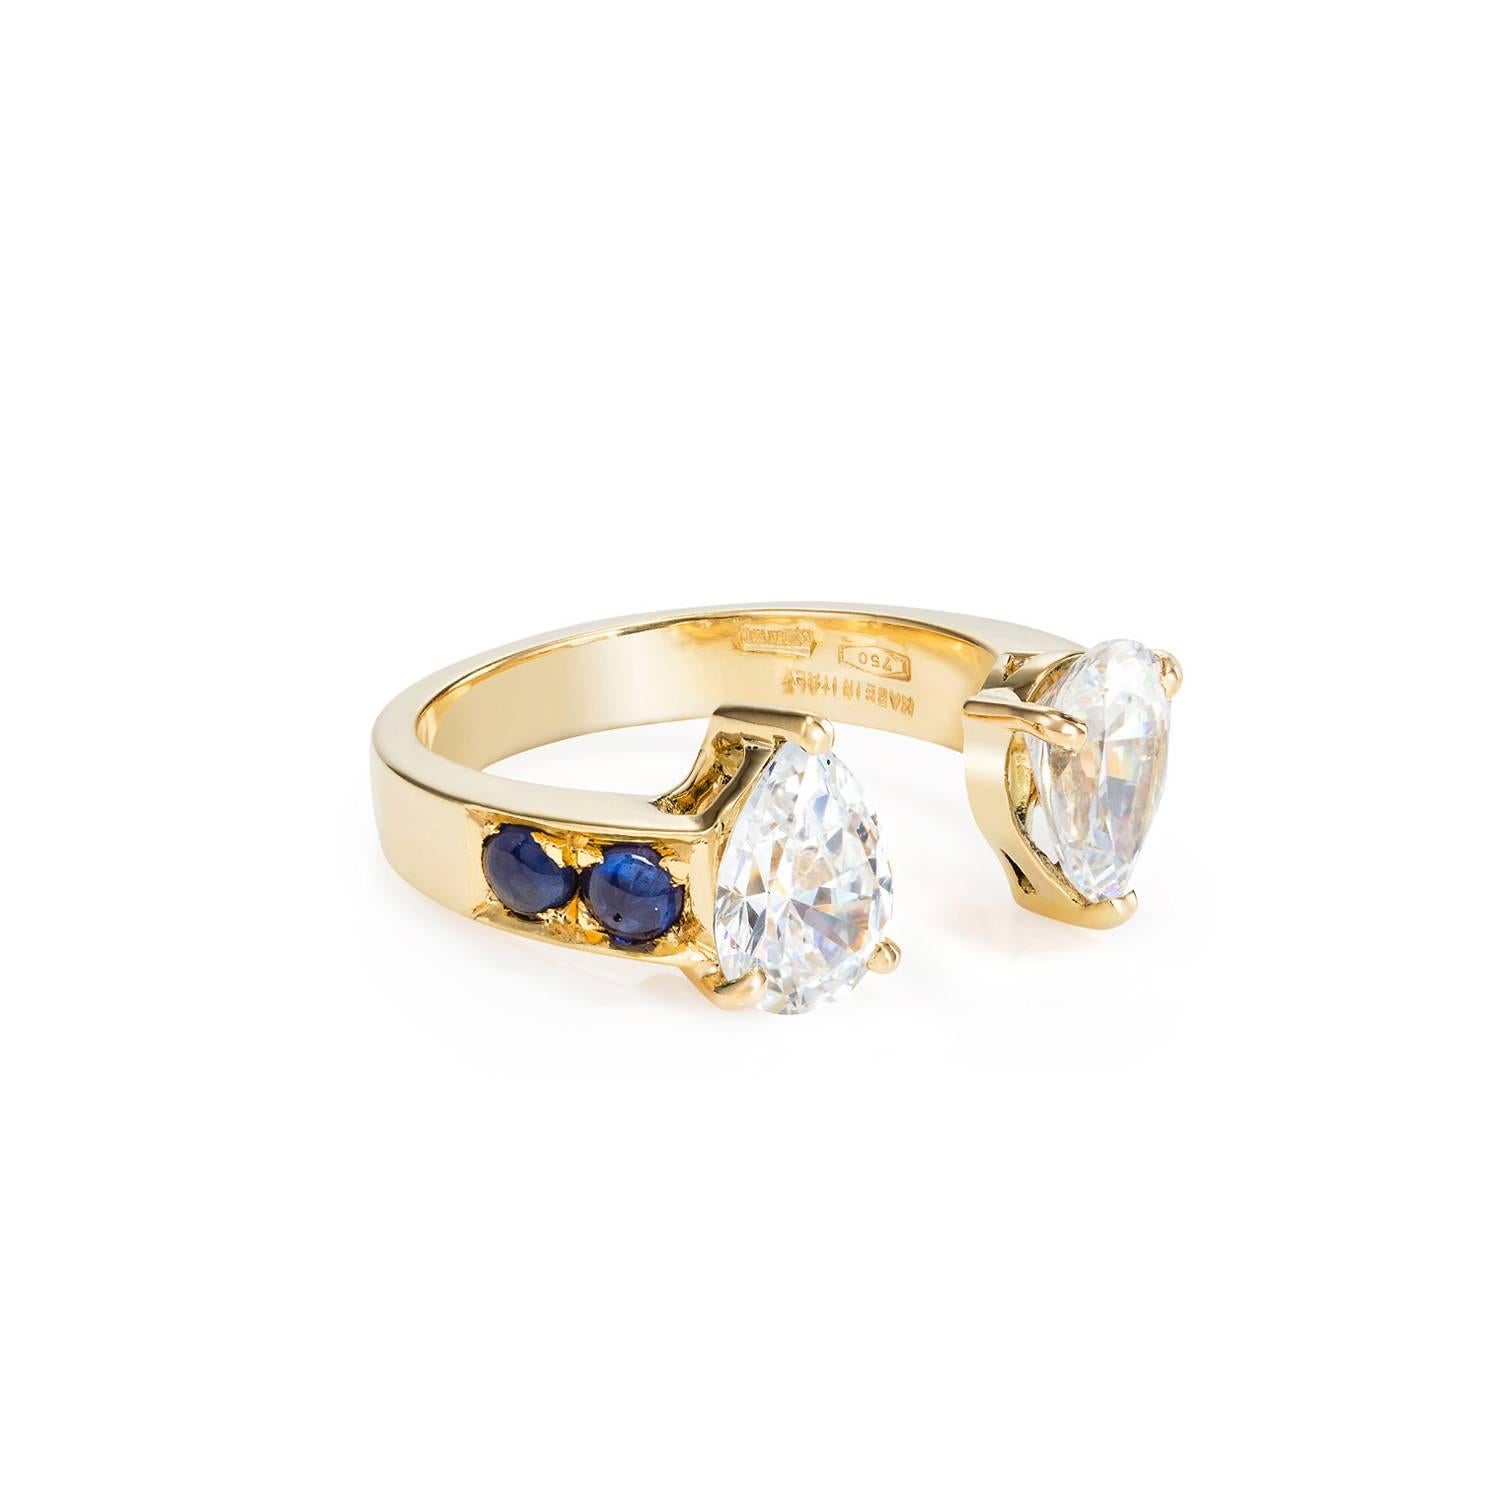 This DUBINI ring from the 'Theodora' collection features white topaz drops with sapphire cabochons set in 18K yellow gold. 

Diamonds can be used instead of White Zircon - PRICE UPON